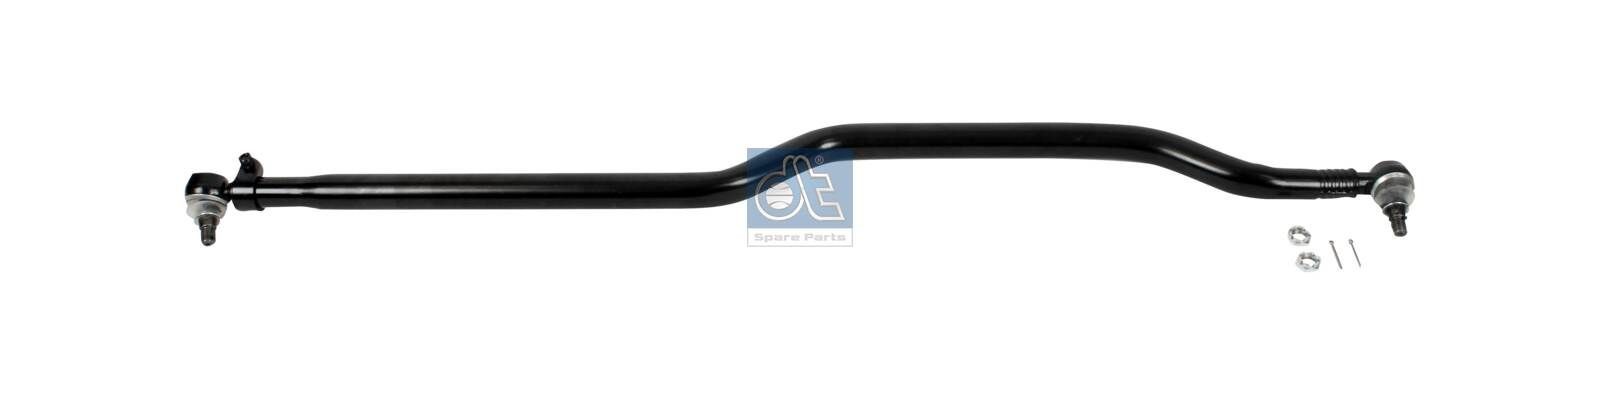 DT Spare Parts 4.66465 Rod Assembly A385 330 16 03